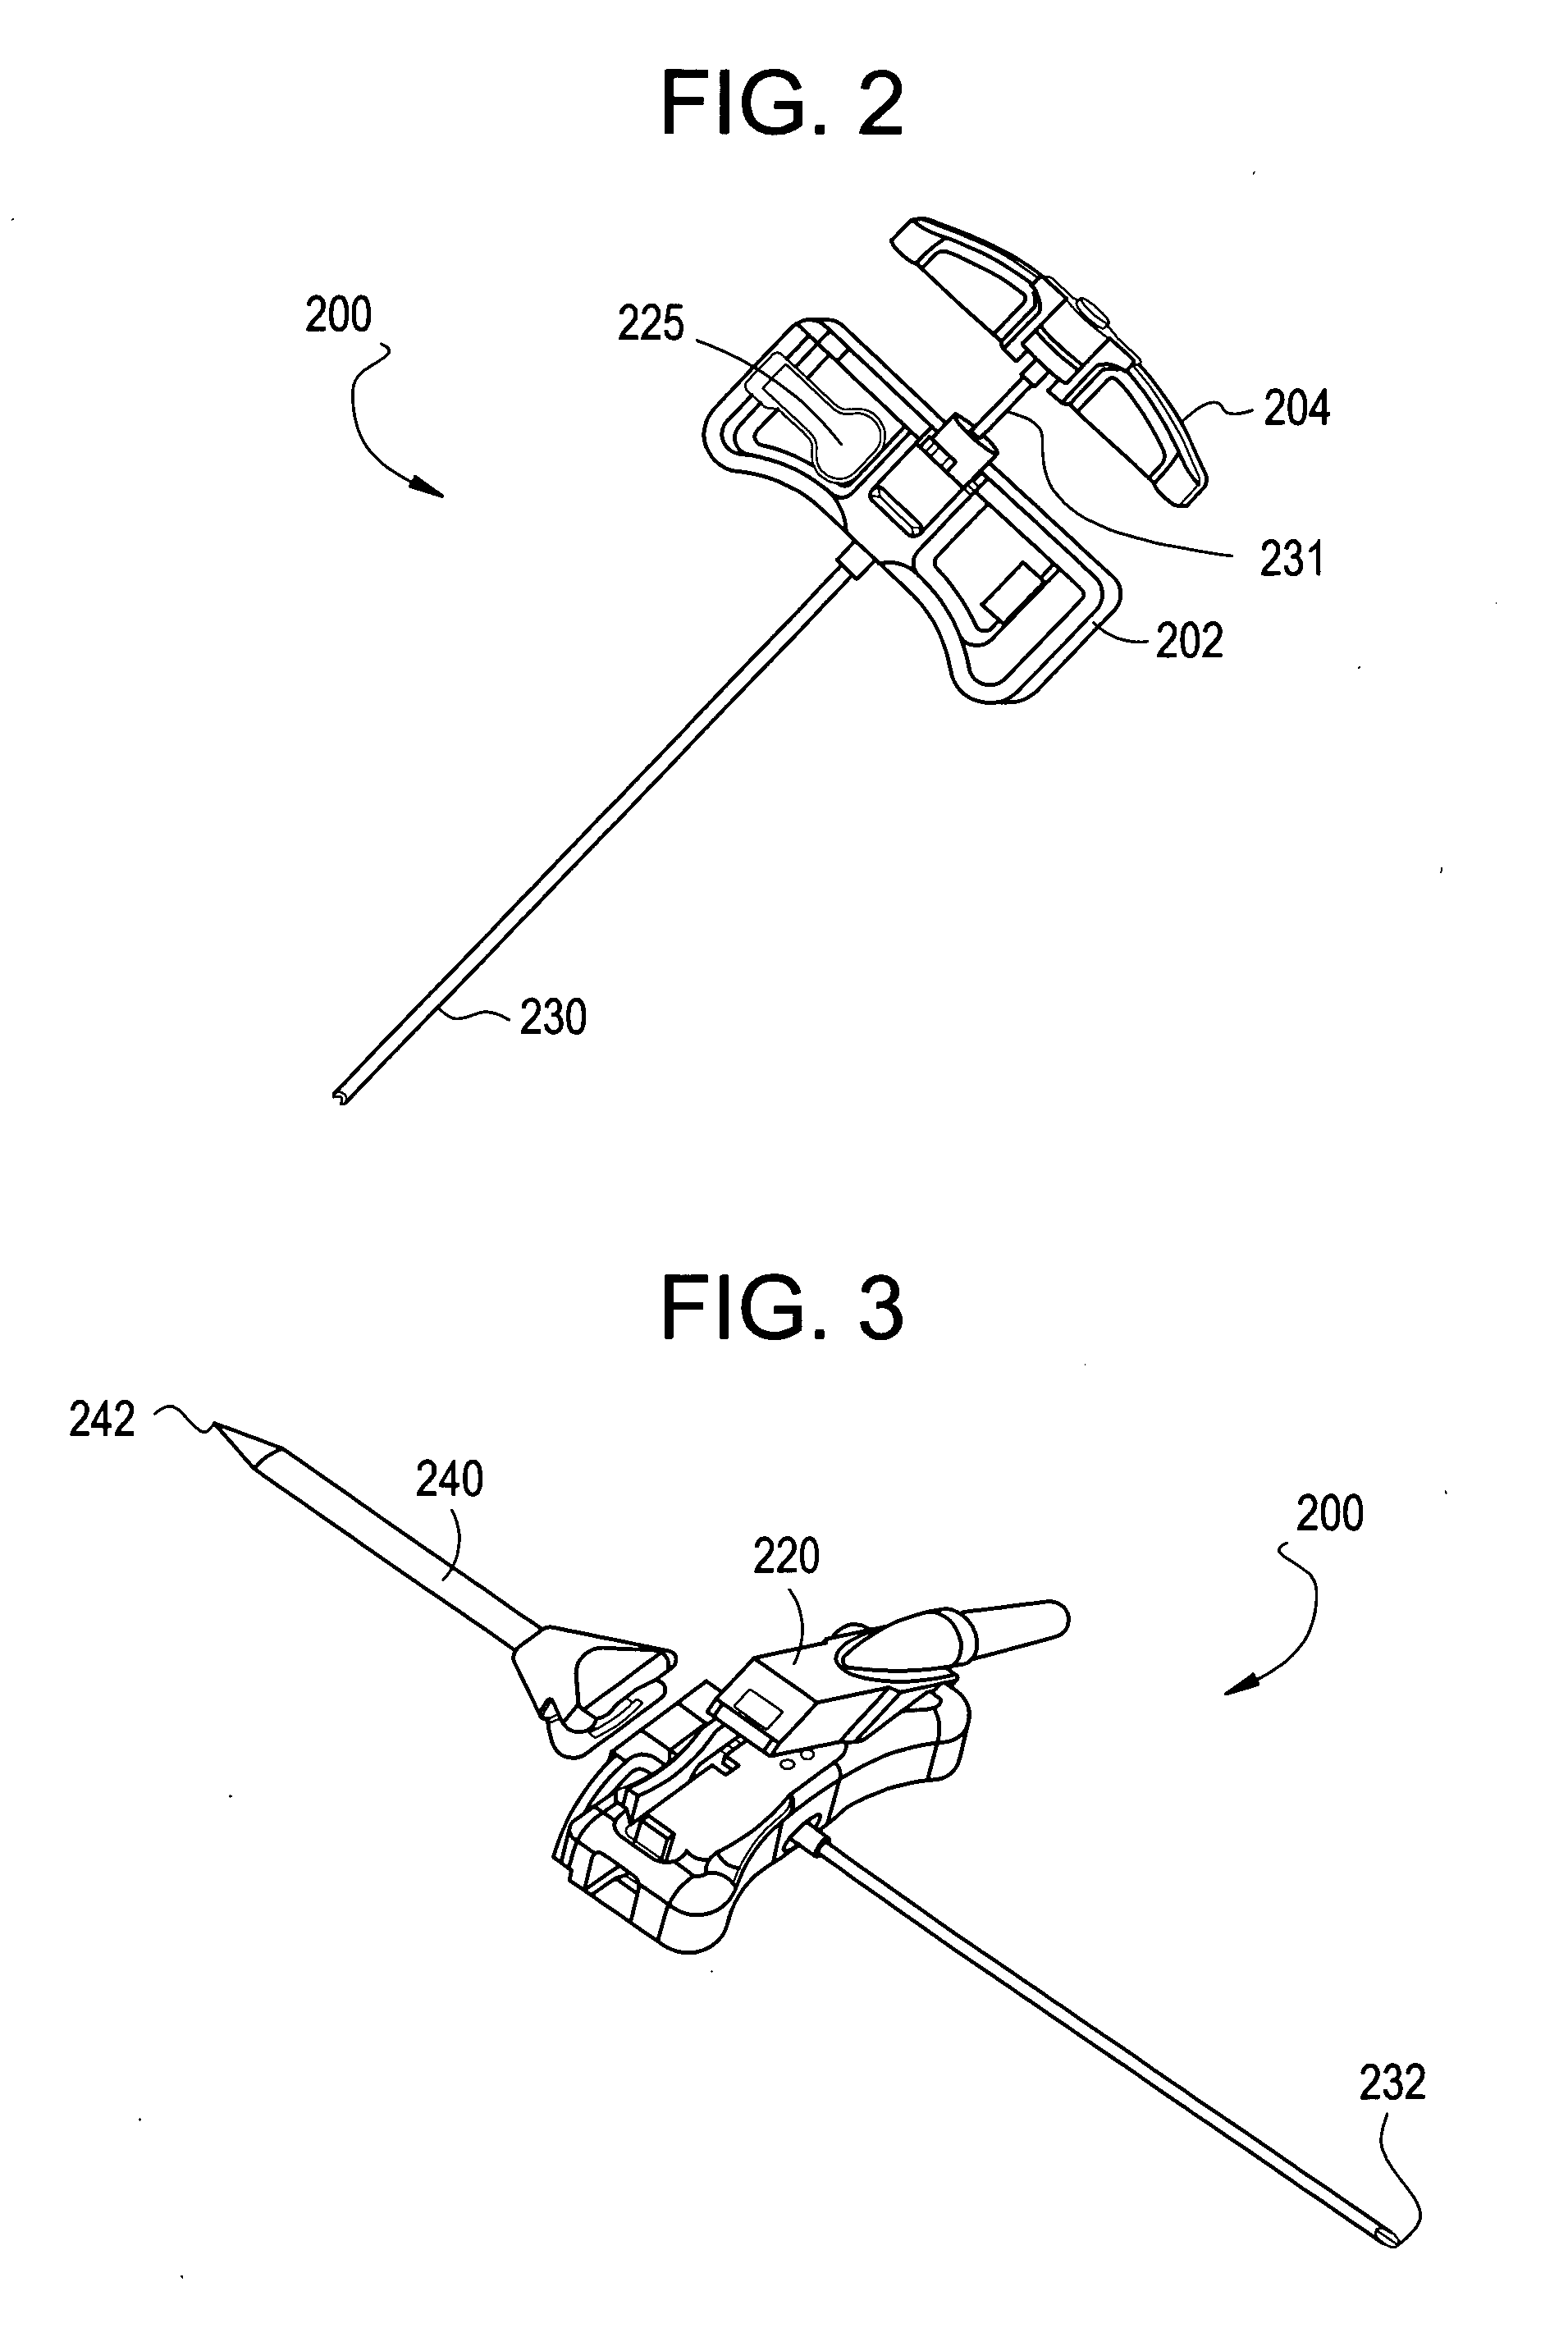 Navigation and visualization of an access needle system